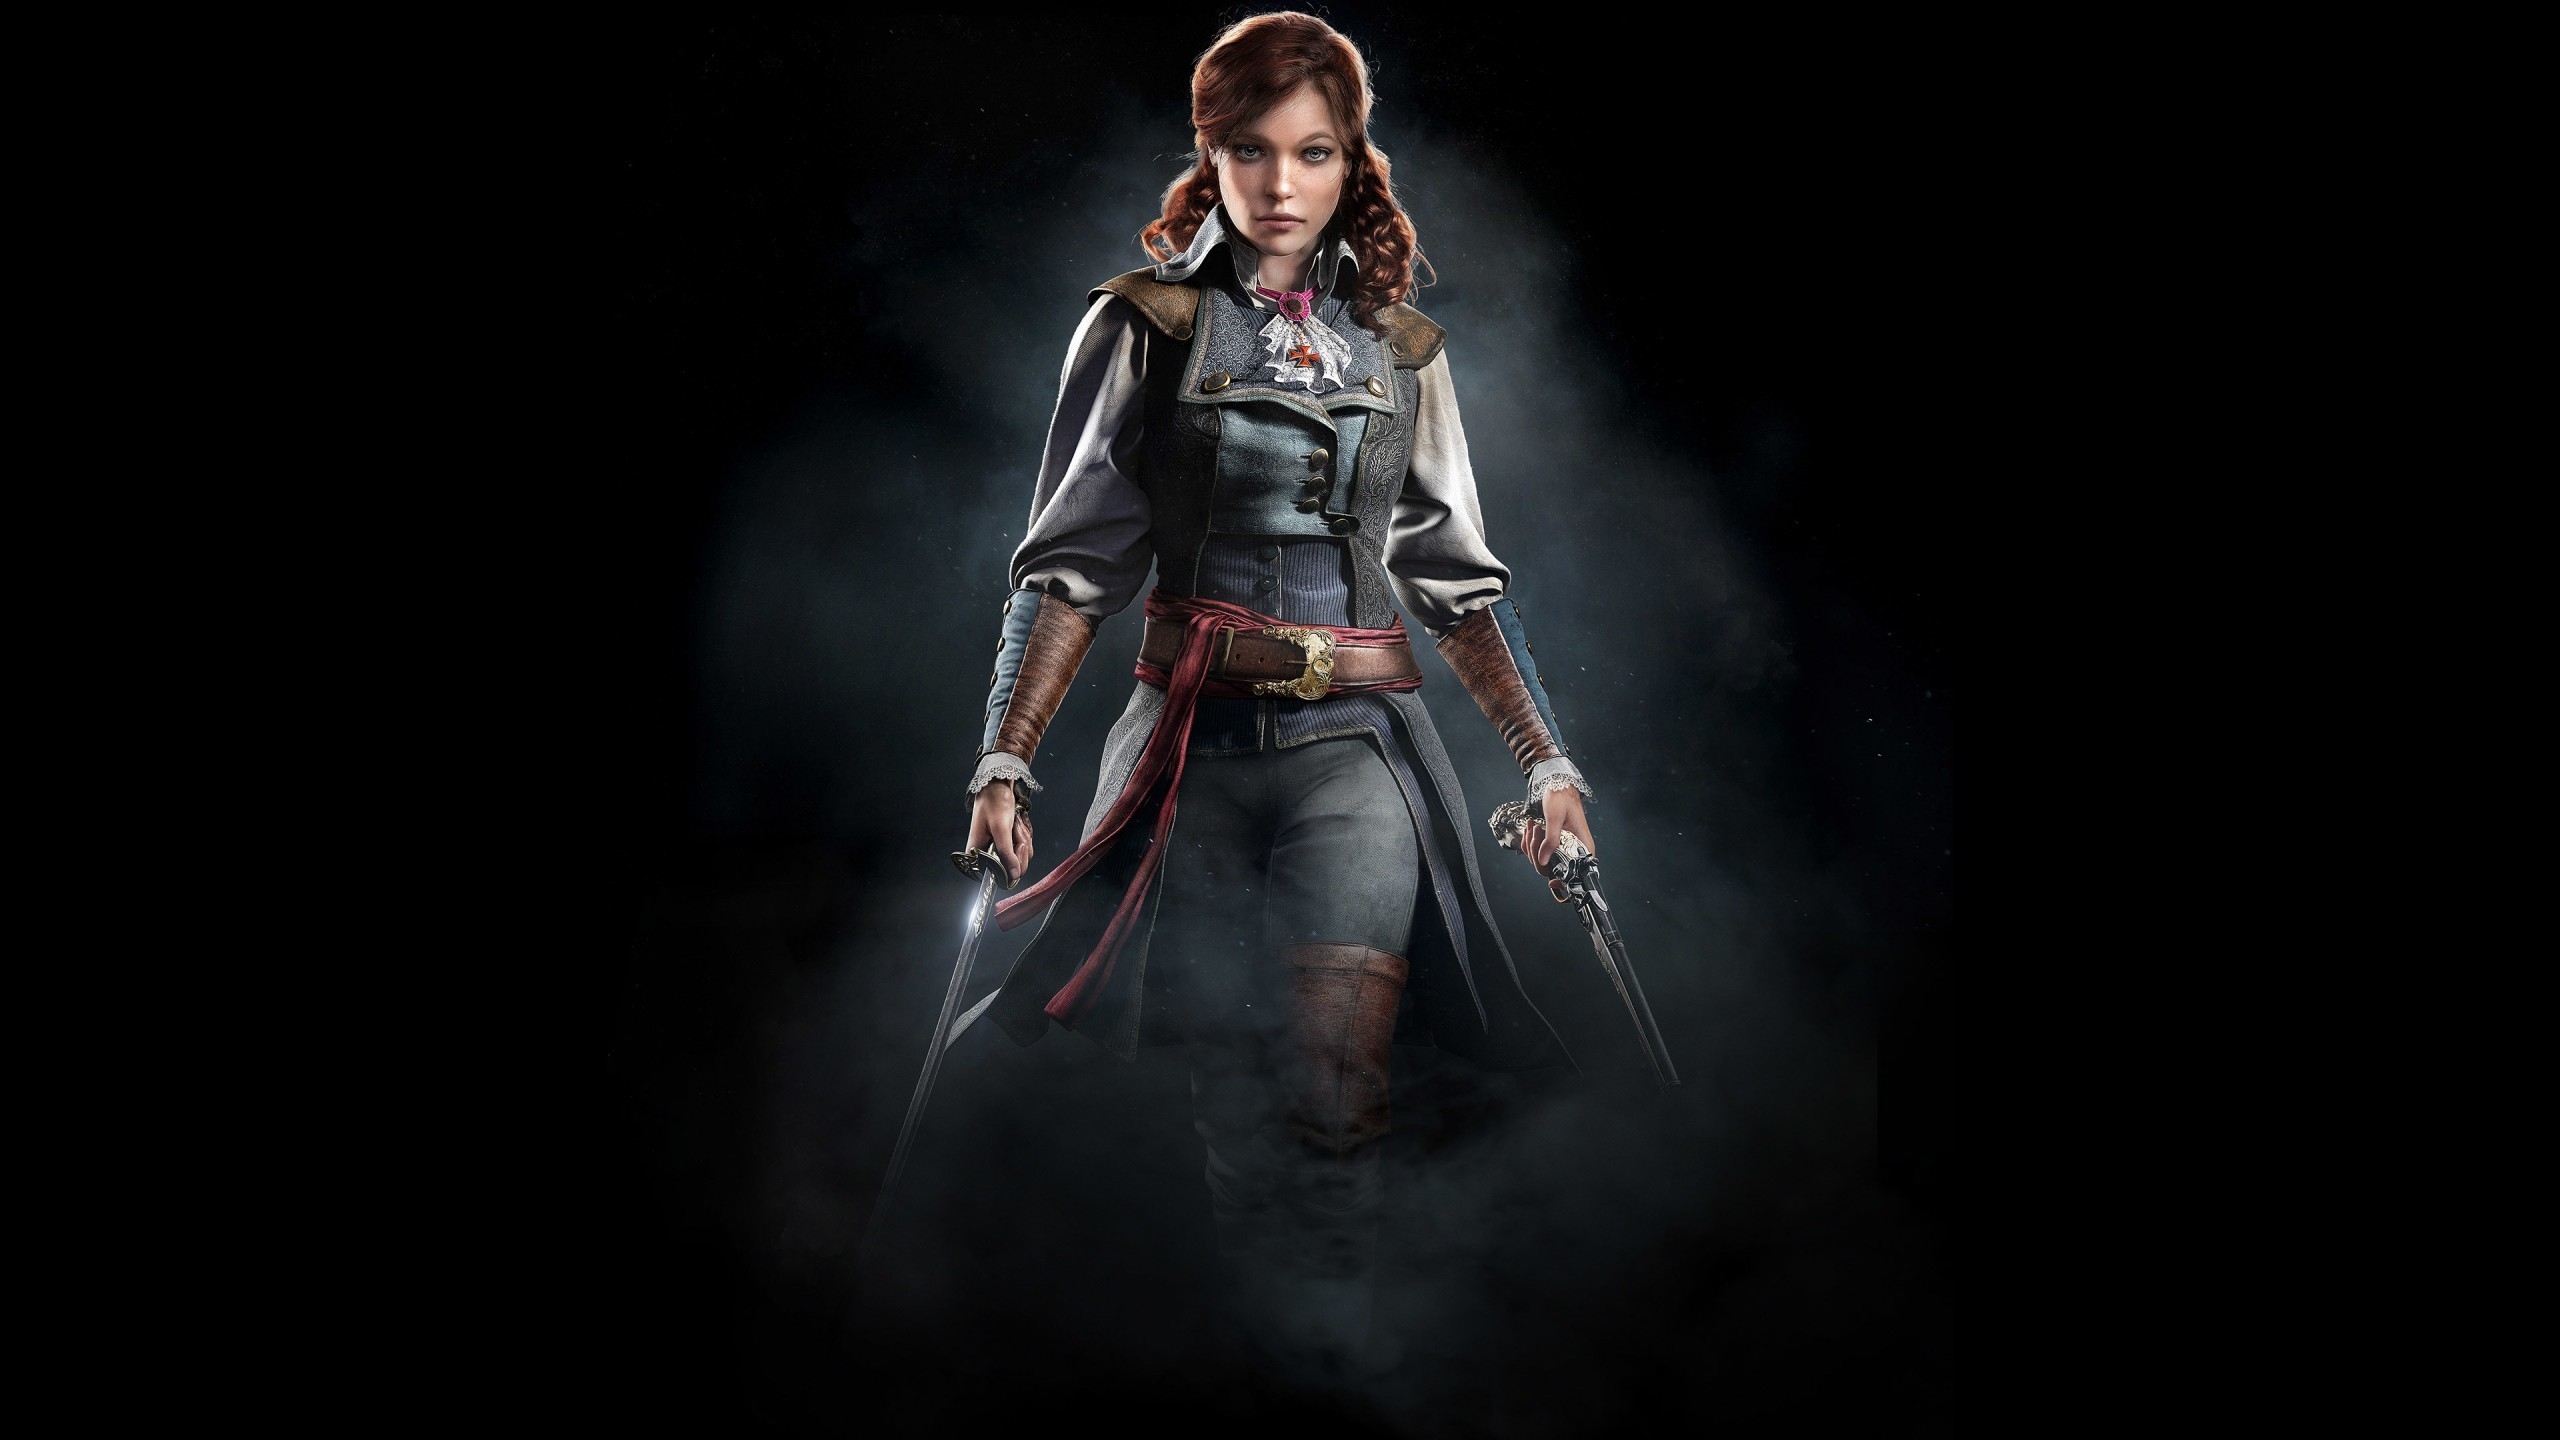 Elise Assassins Creed Unity  for 2560x1440 HDTV resolution